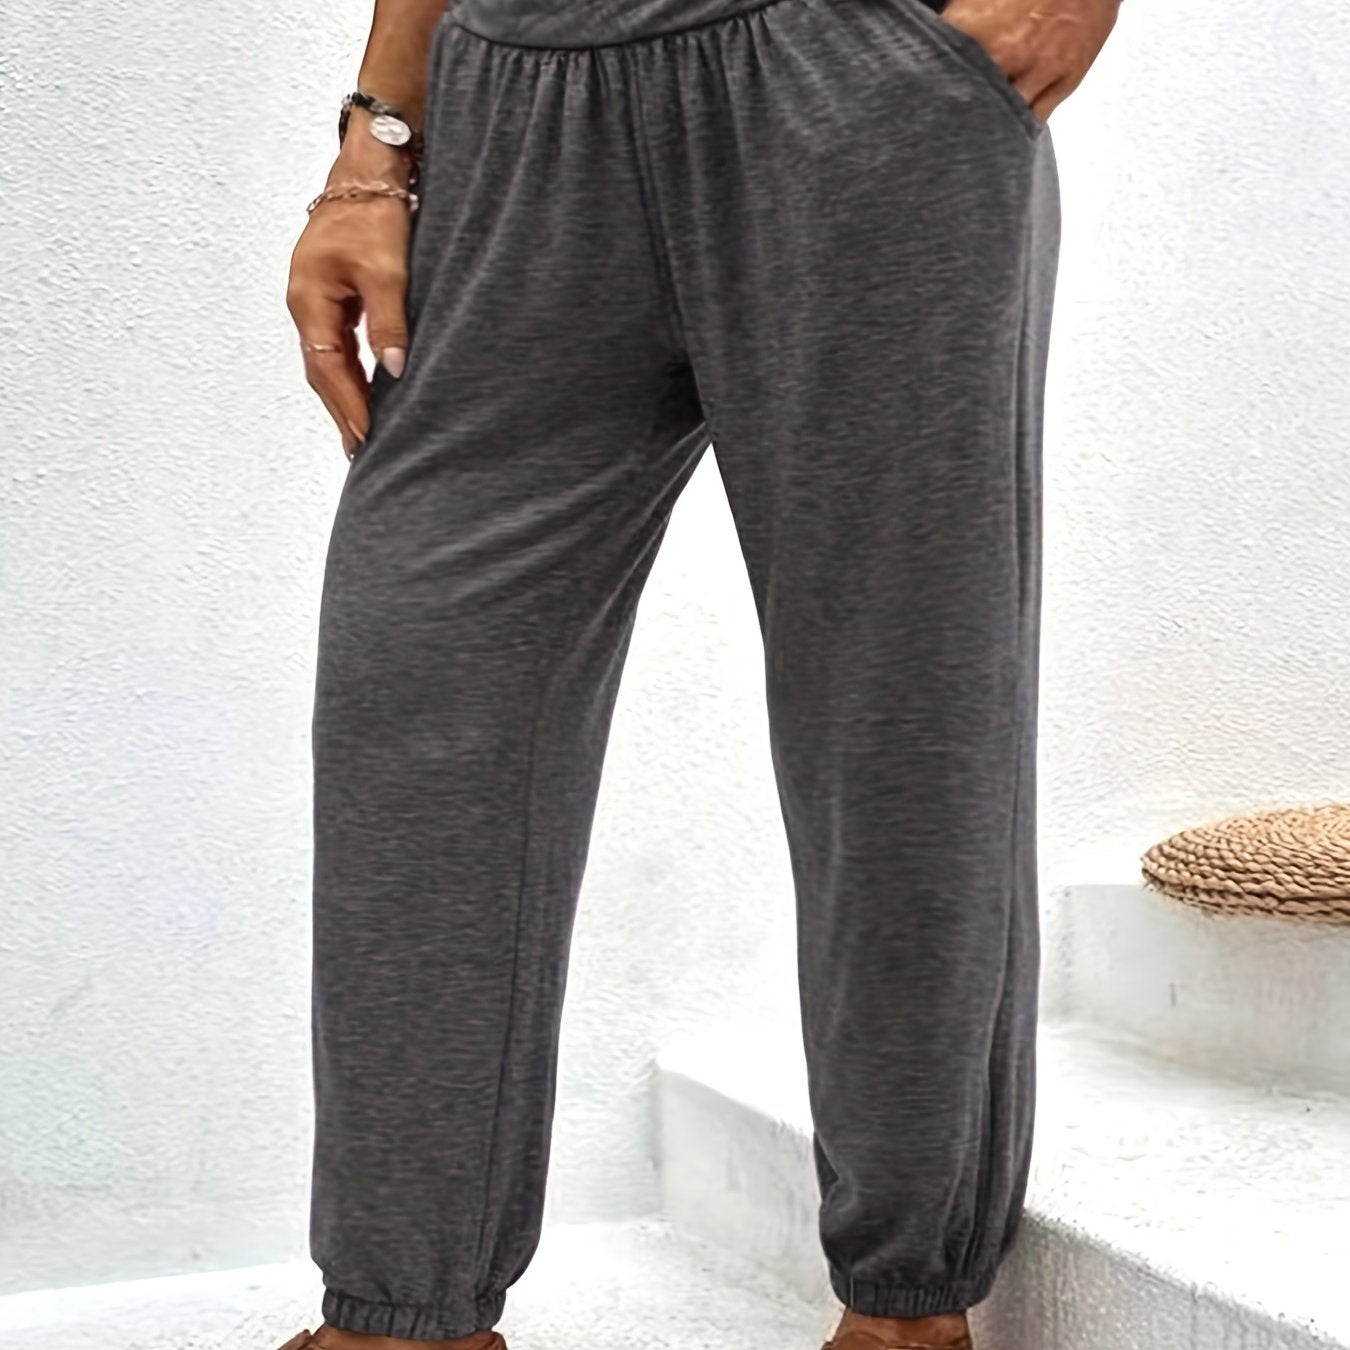 Plus Size Sporty Pants, Women's Plus Solid Tummy Control Slight Stretch Jogger Trousers With Pockets Dark Gray